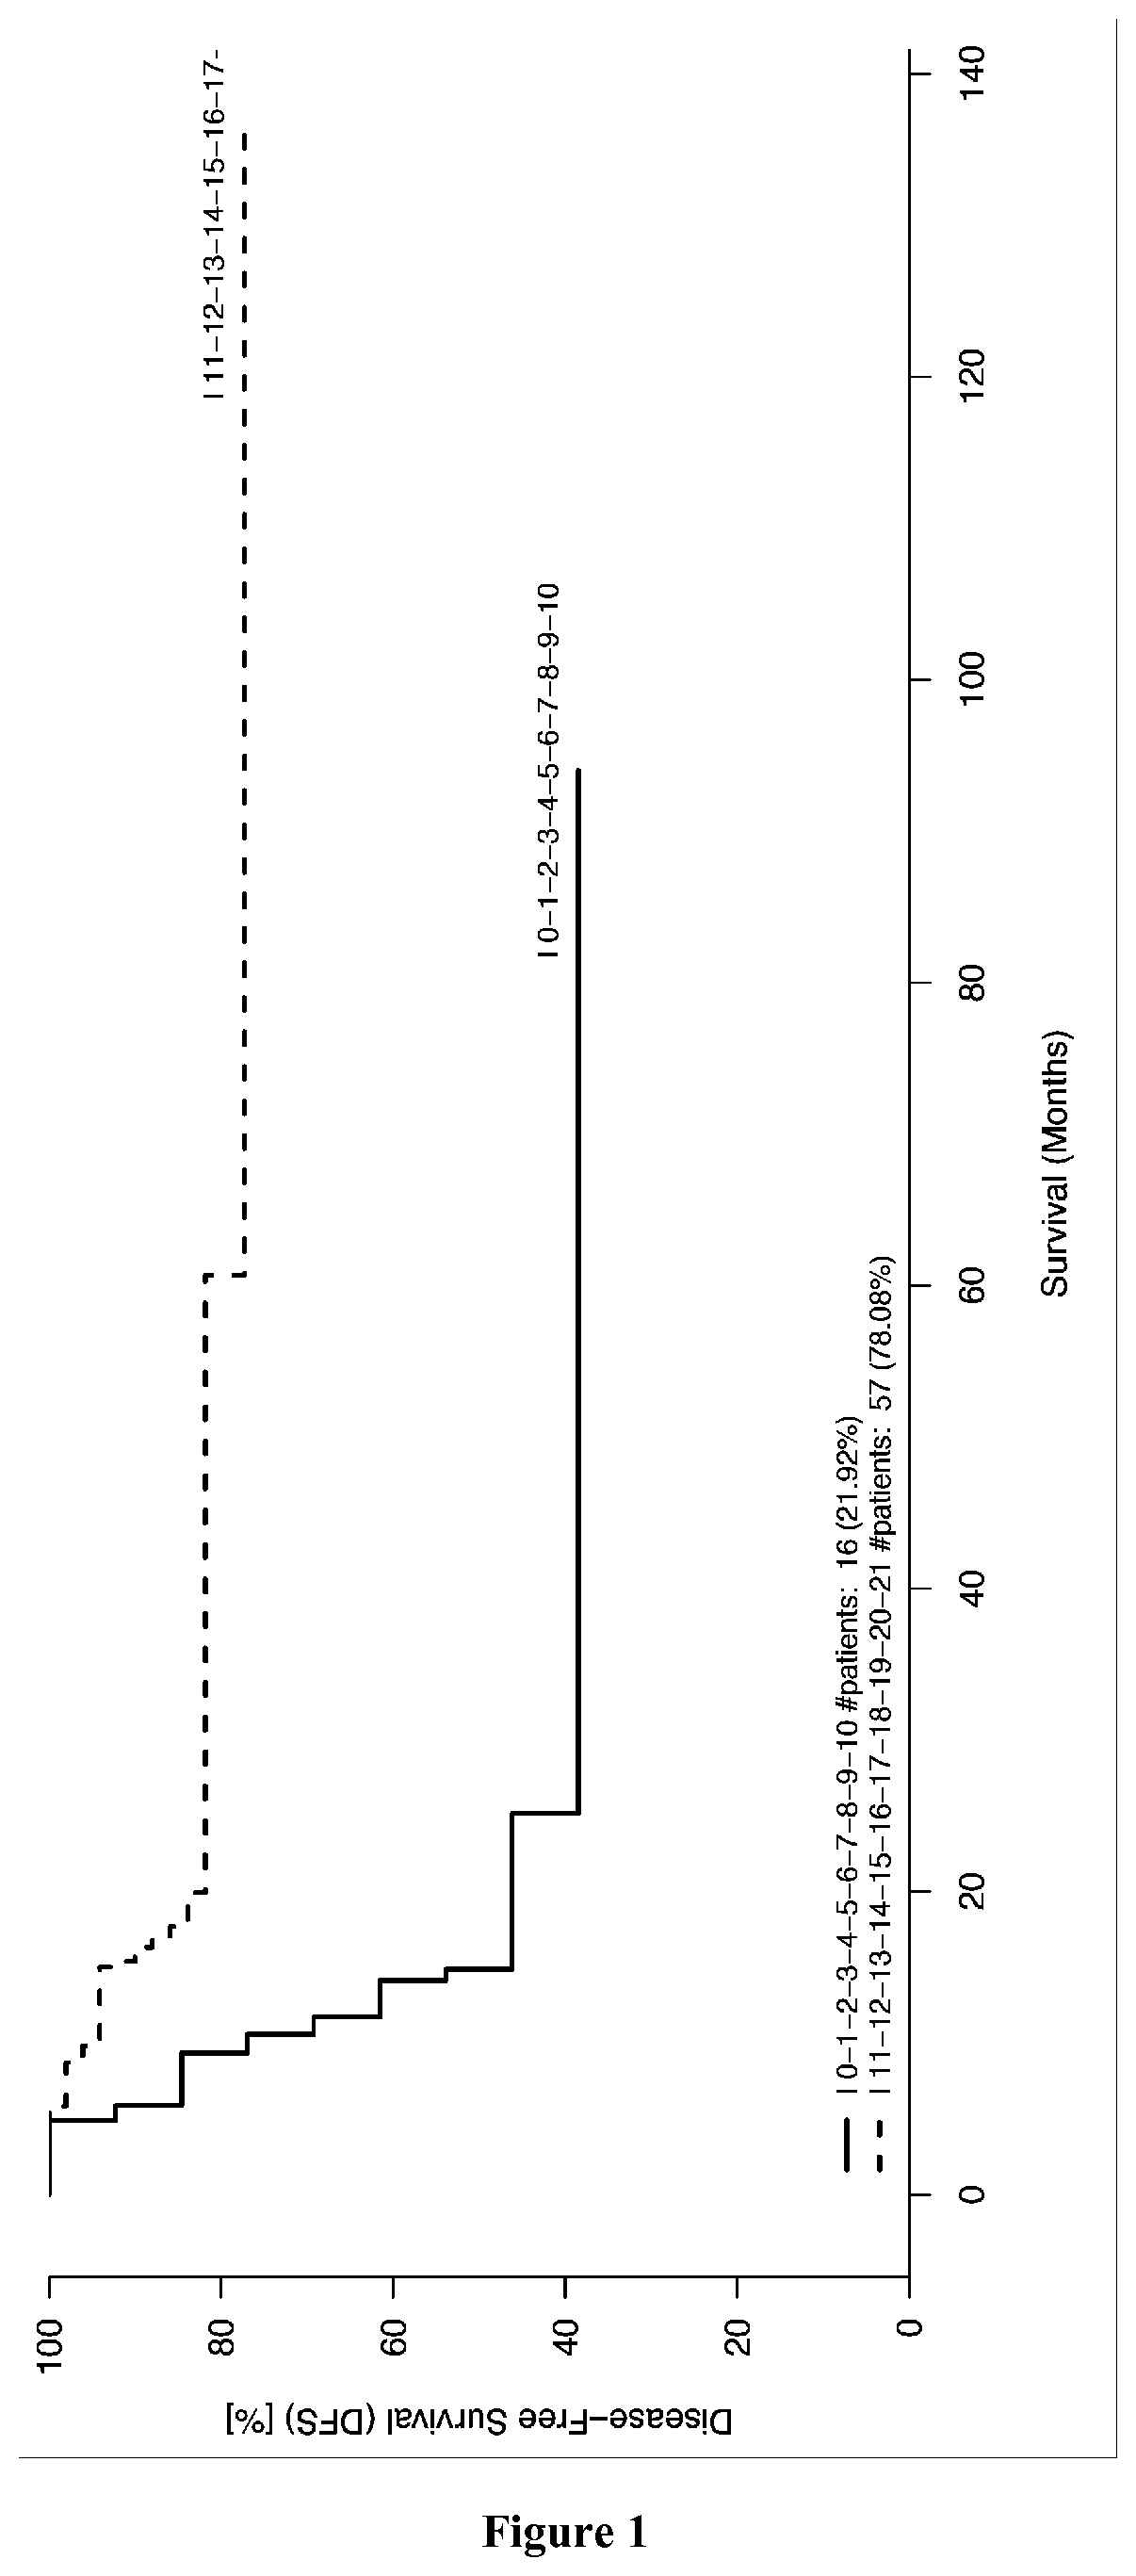 Methods for predicting the survival time and treatment responsiveness of a patient suffering from a solid cancer with a signature of at least 7 genes